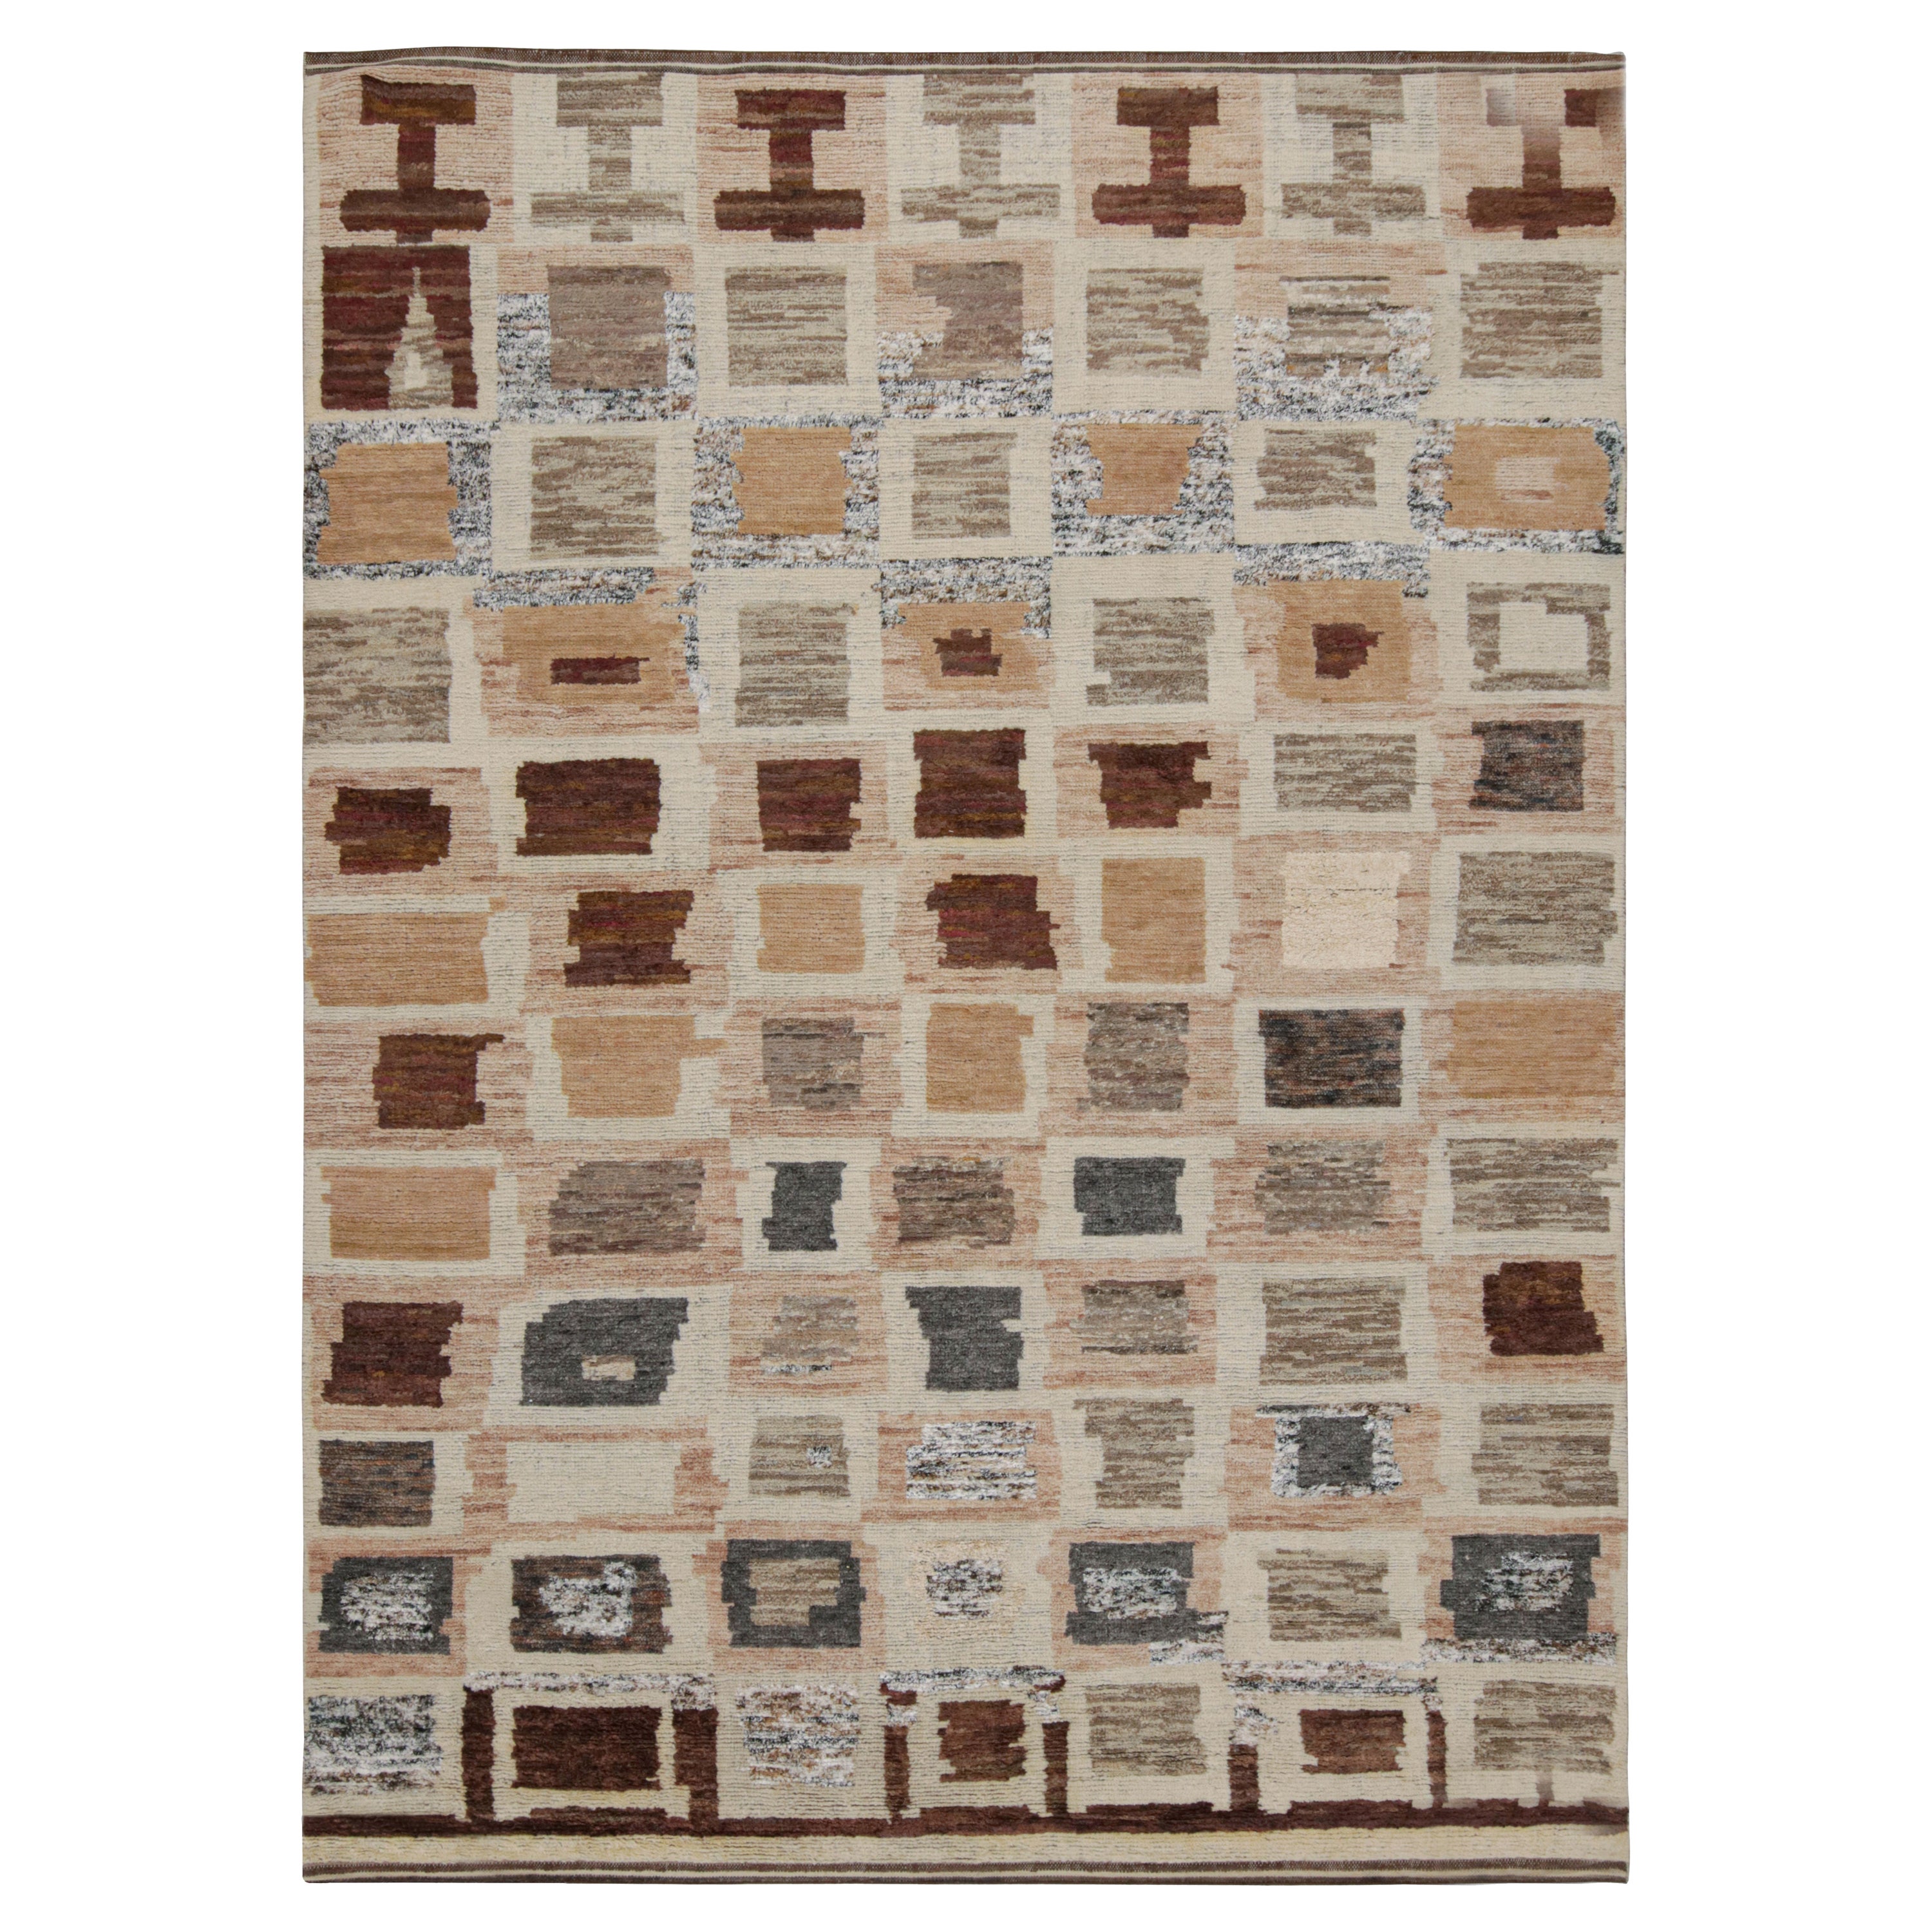 Rug & Kilim’s Geometric Moroccan Style Rug in Beige-Brown and Gray For Sale